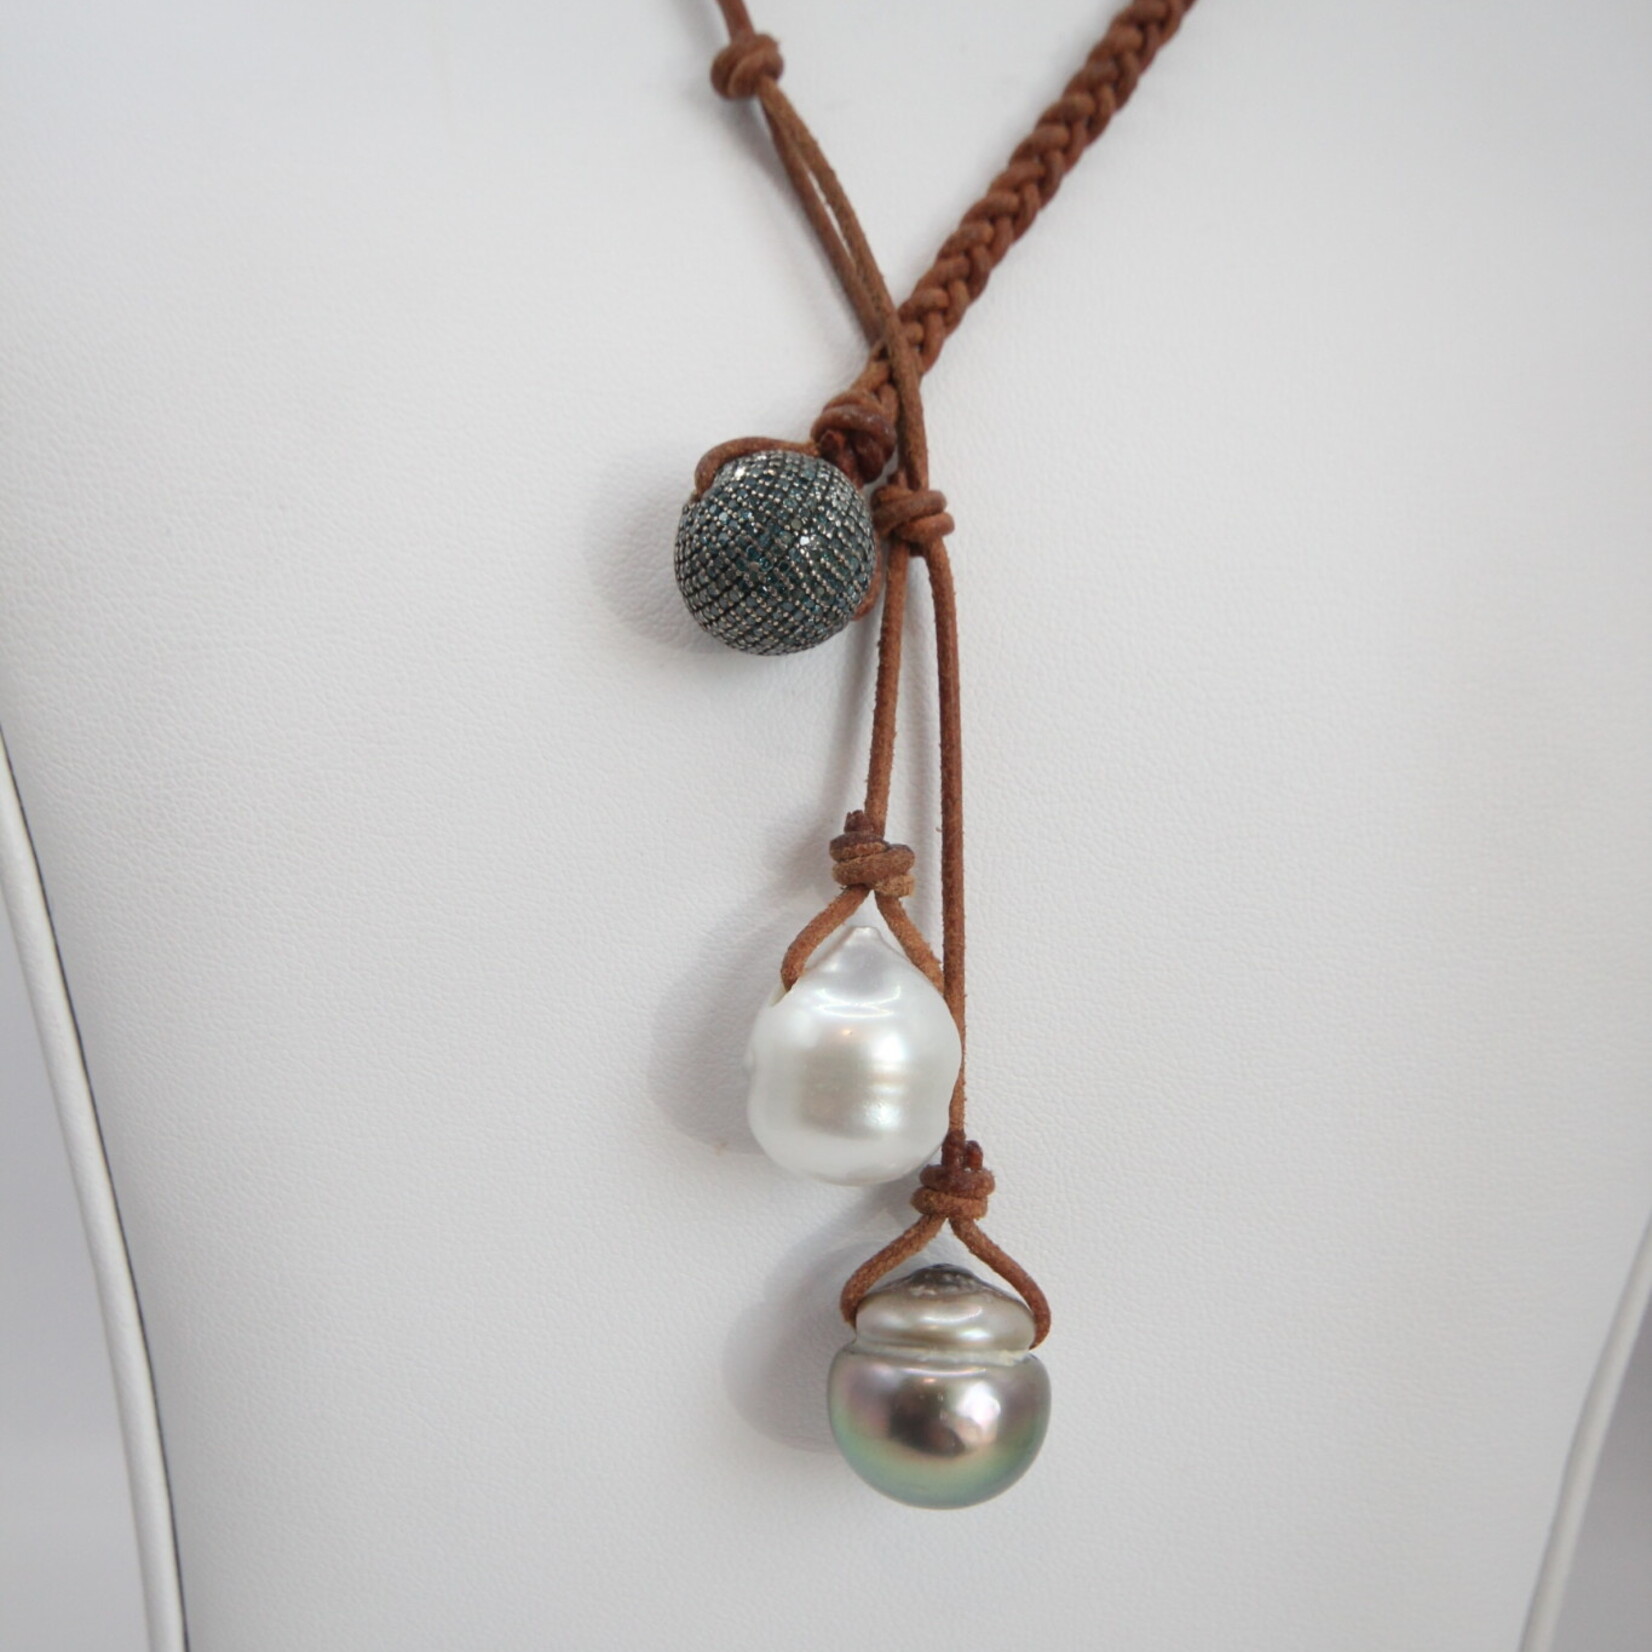 Blue Pave Diamond Ball with South Sea and Tahitian Pearls on Half Braided Natural Leather Cord